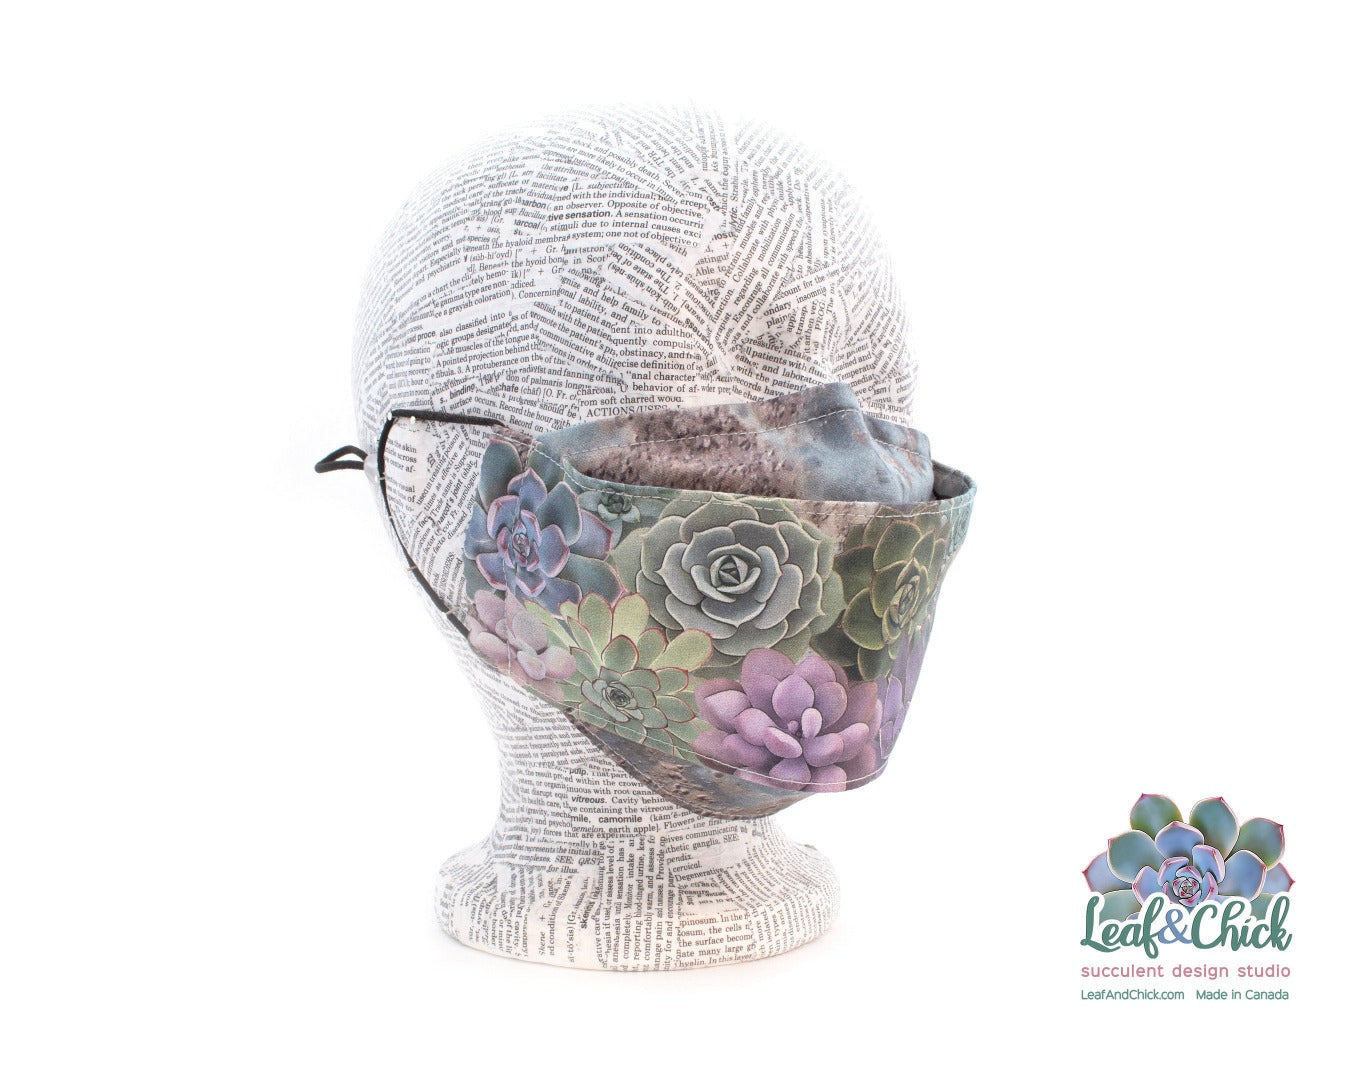 3 layer succulent face mask with custom fabric exclusively designed for Leaf and Chick